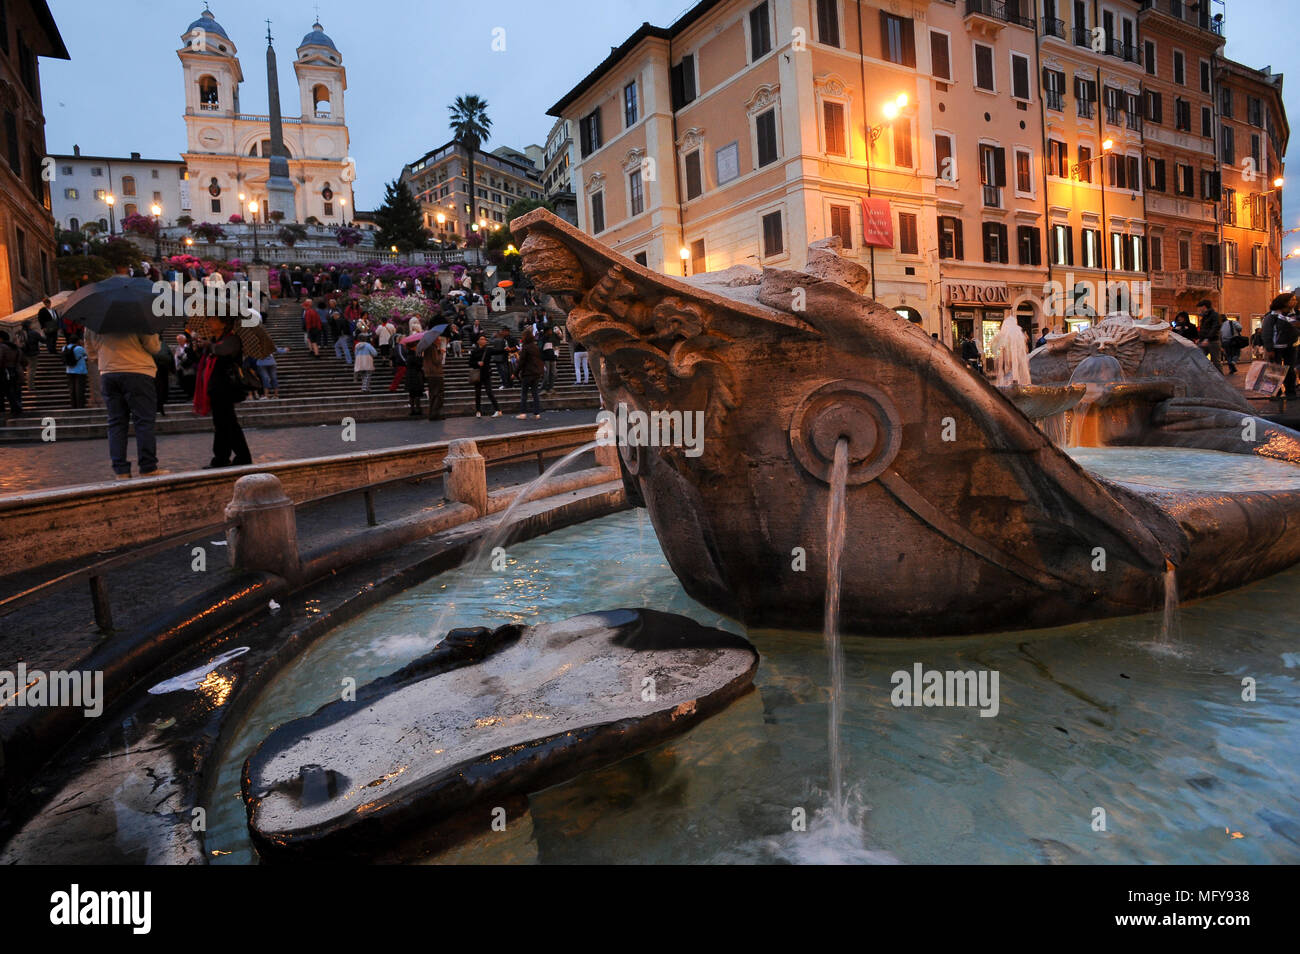 Early Baroque Fontana della Barcaccia (Fountain of the Old Boat) from XVII century on Piazza di Spagna, Keats–Shelley Memorial House on the right, mon Stock Photo